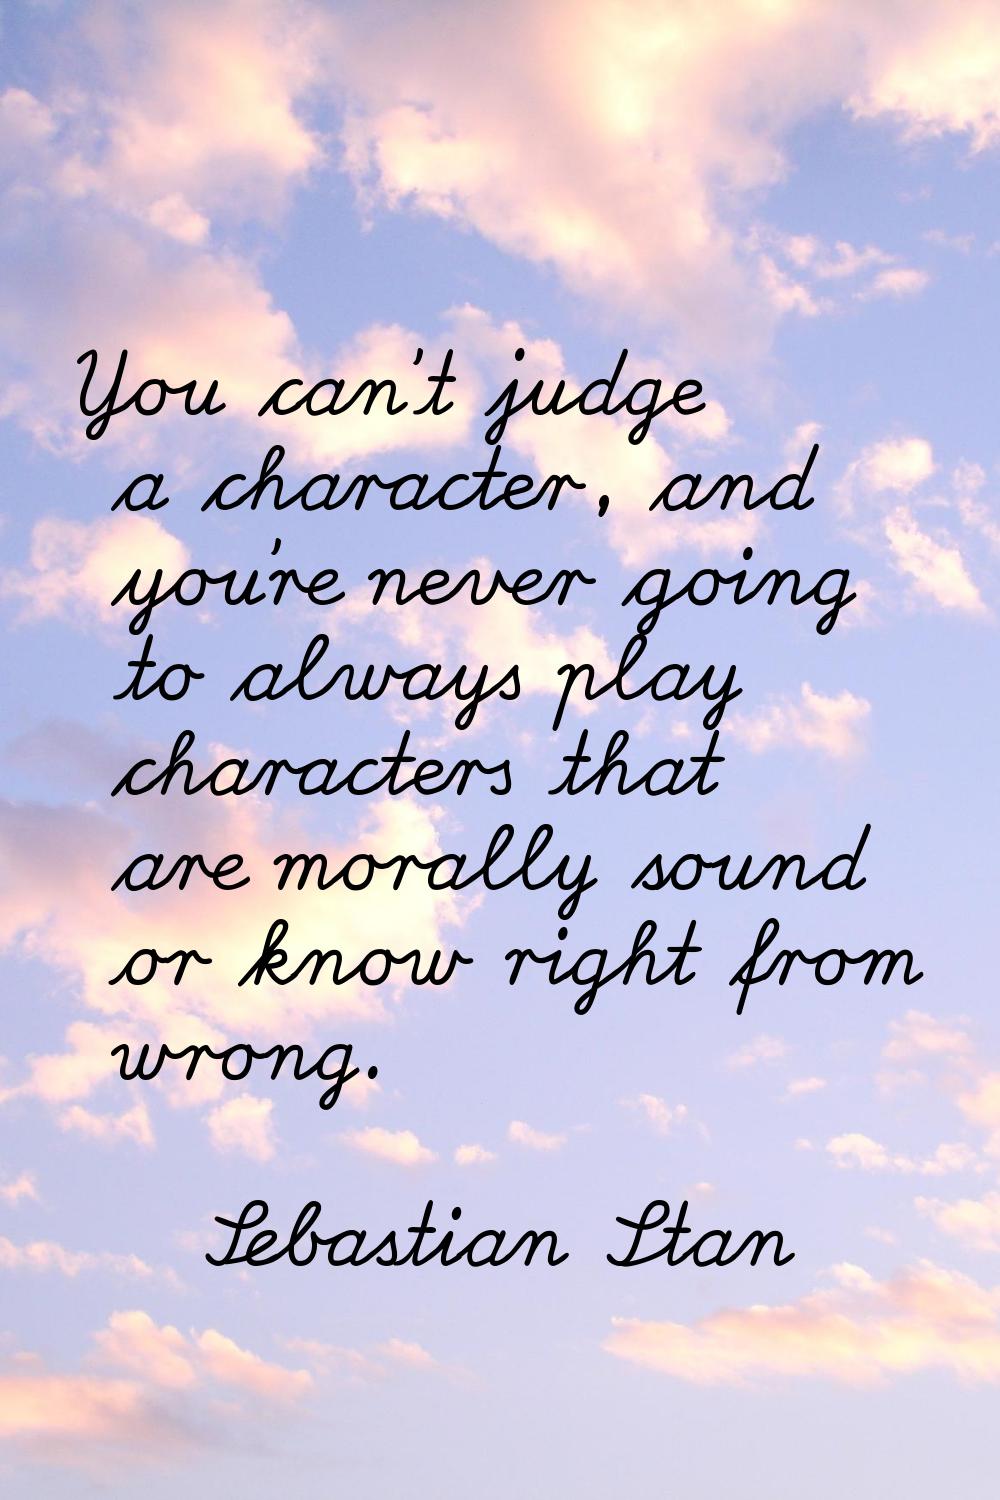 You can't judge a character, and you're never going to always play characters that are morally soun